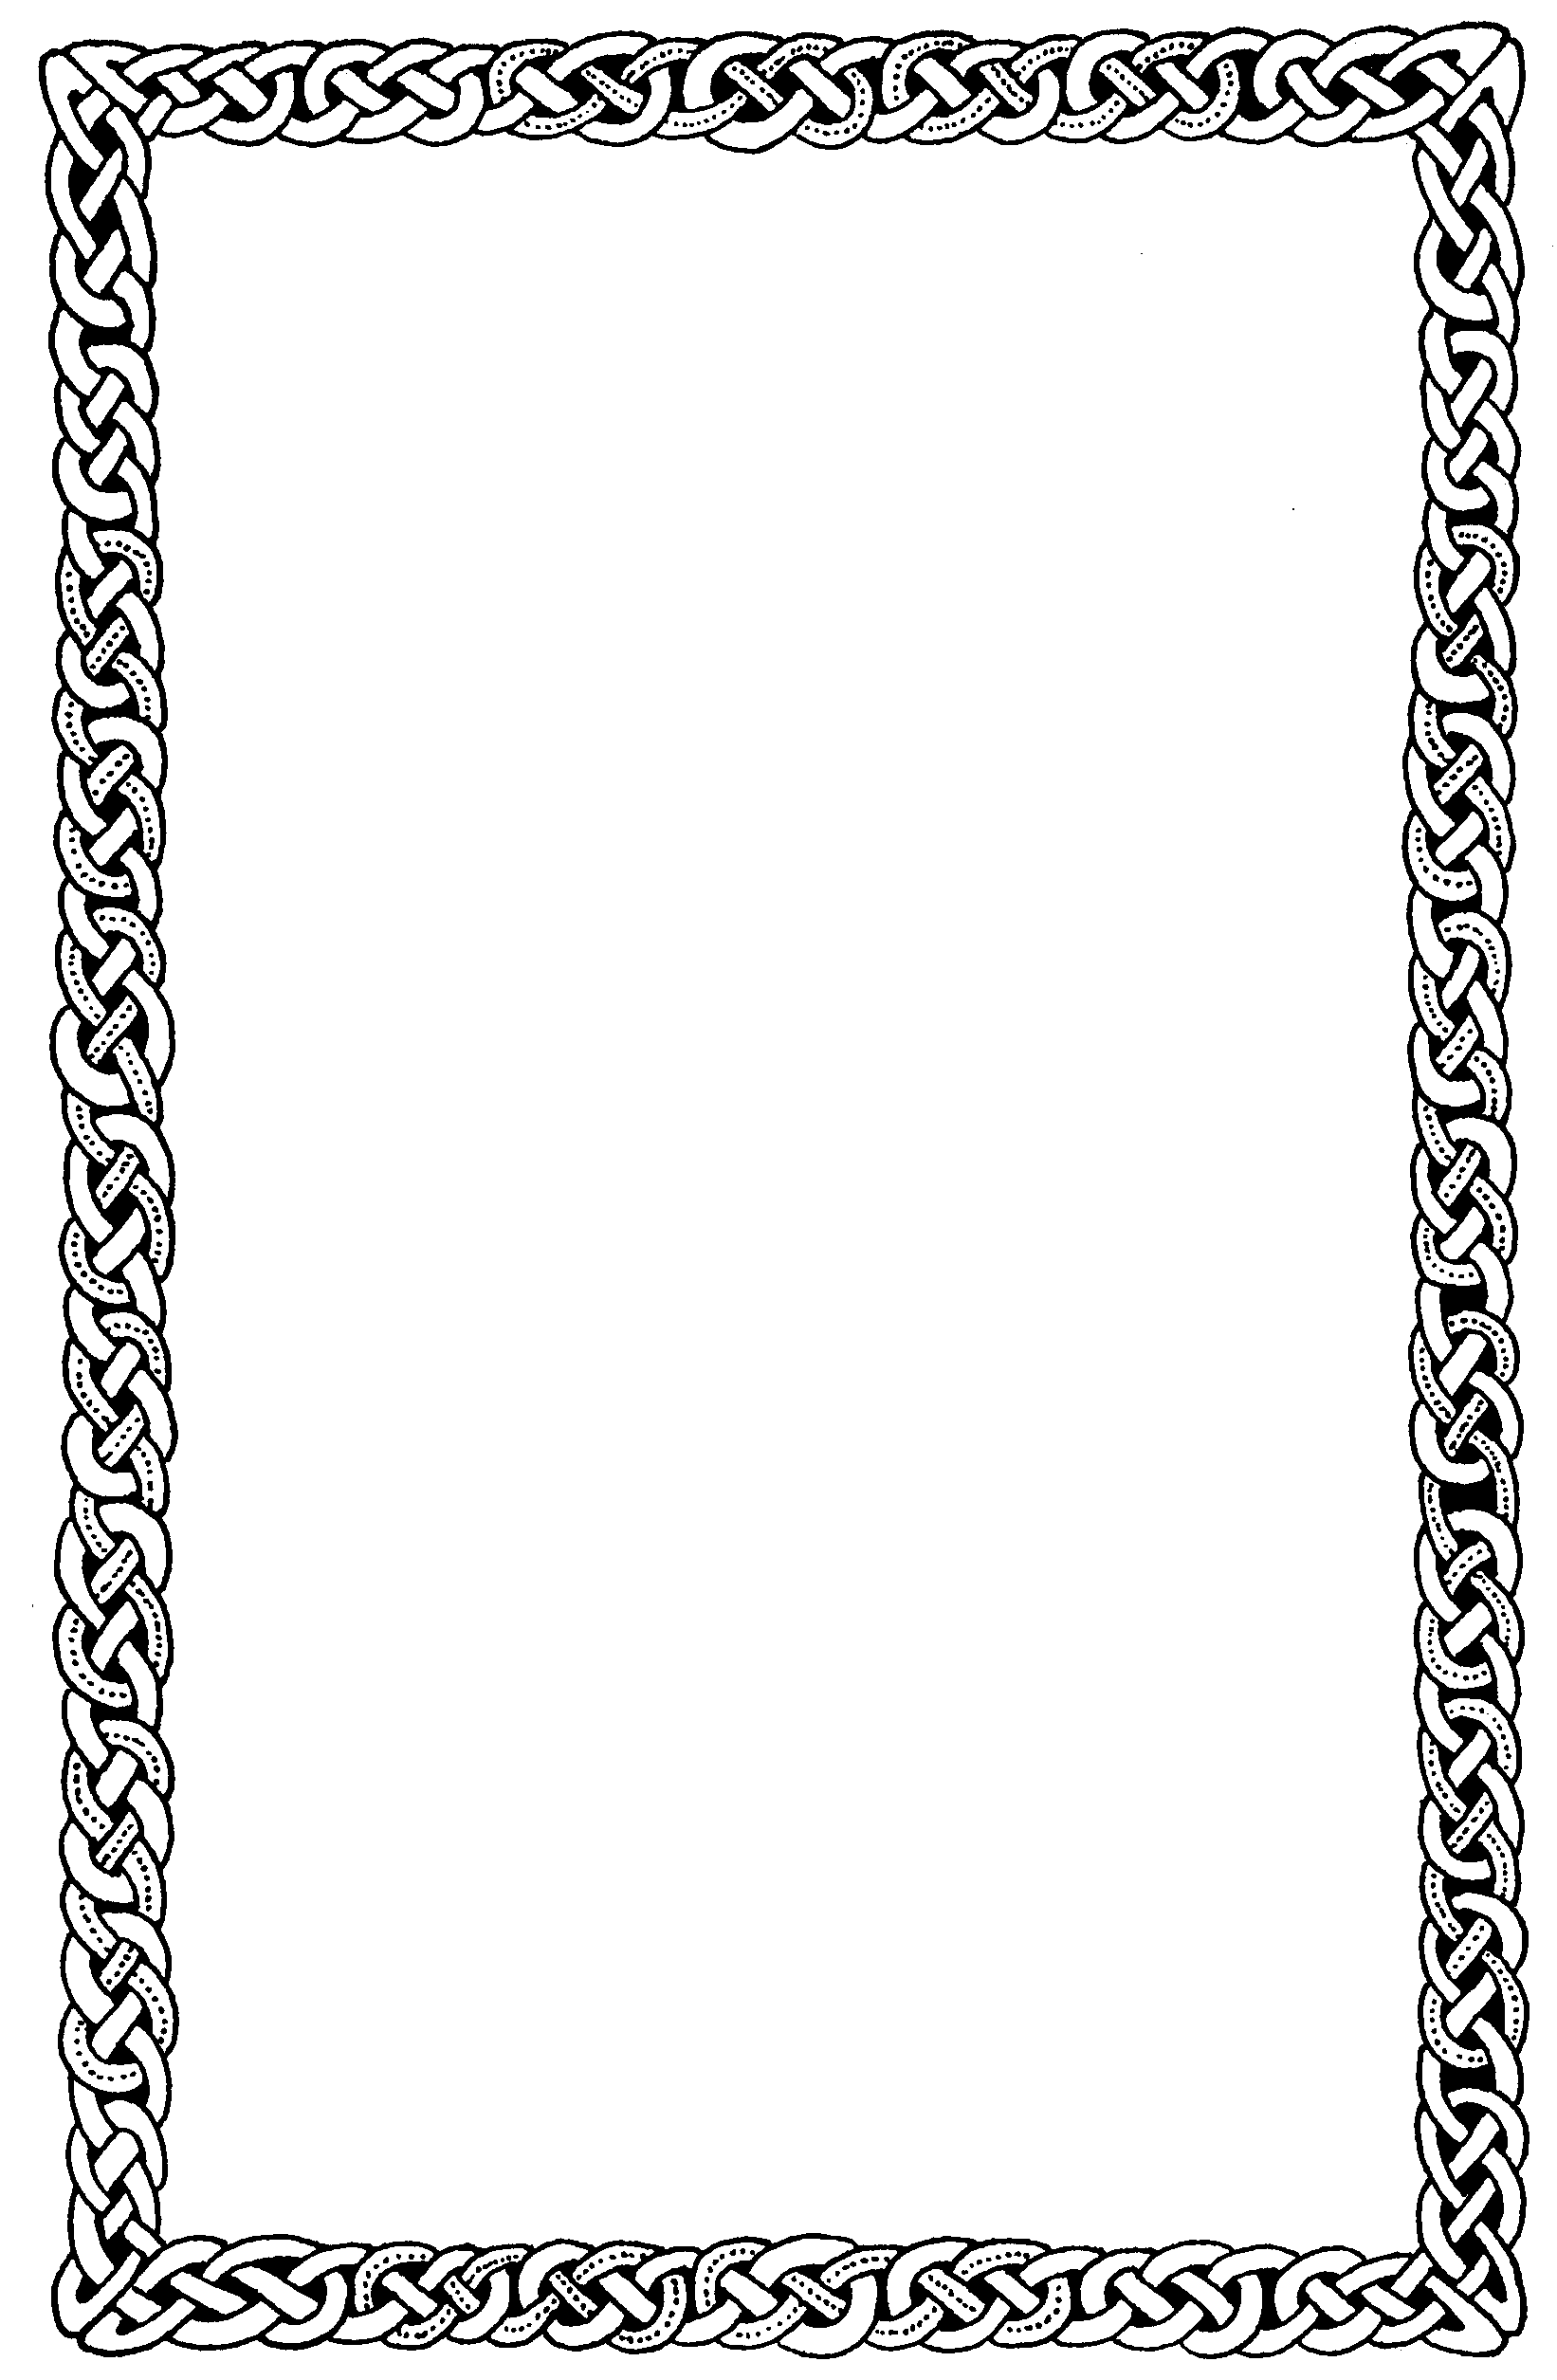 Free clipart backgrounds.